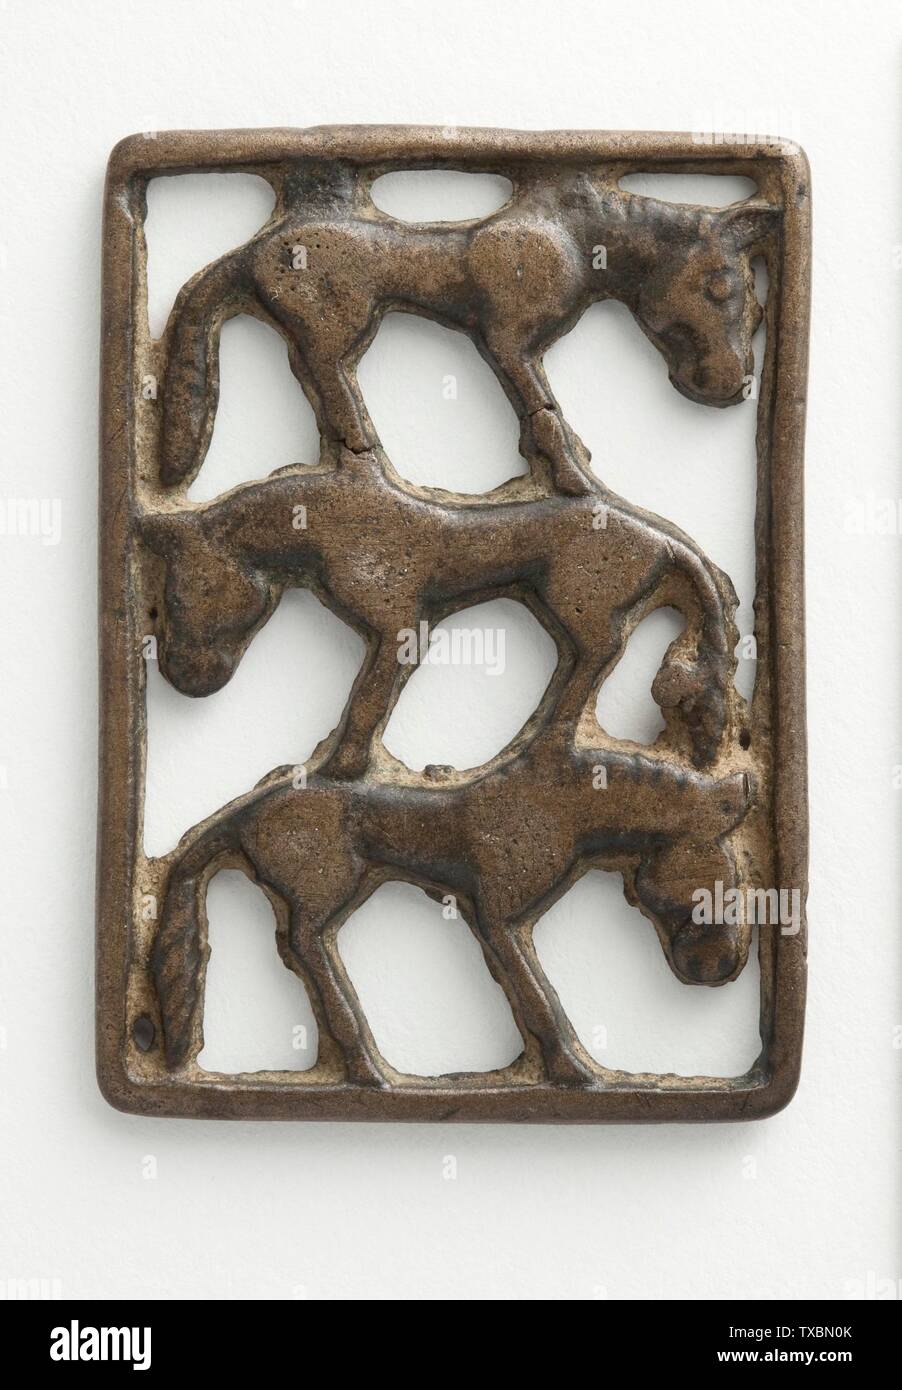 Plaque (Three Horses) (image 2 of 2);  Western Inner Mongolia or Northern China, 5th-4th century B.C. Sculpture; plaques Bronze The Nasli M. Heeramaneck Collection of Ancient Near Eastern and Central Asian Art, gift of The Ahmanson Foundation (M.76.97.697) Art of the Ancient Near East; 5th-4th century B.C.; Stock Photo